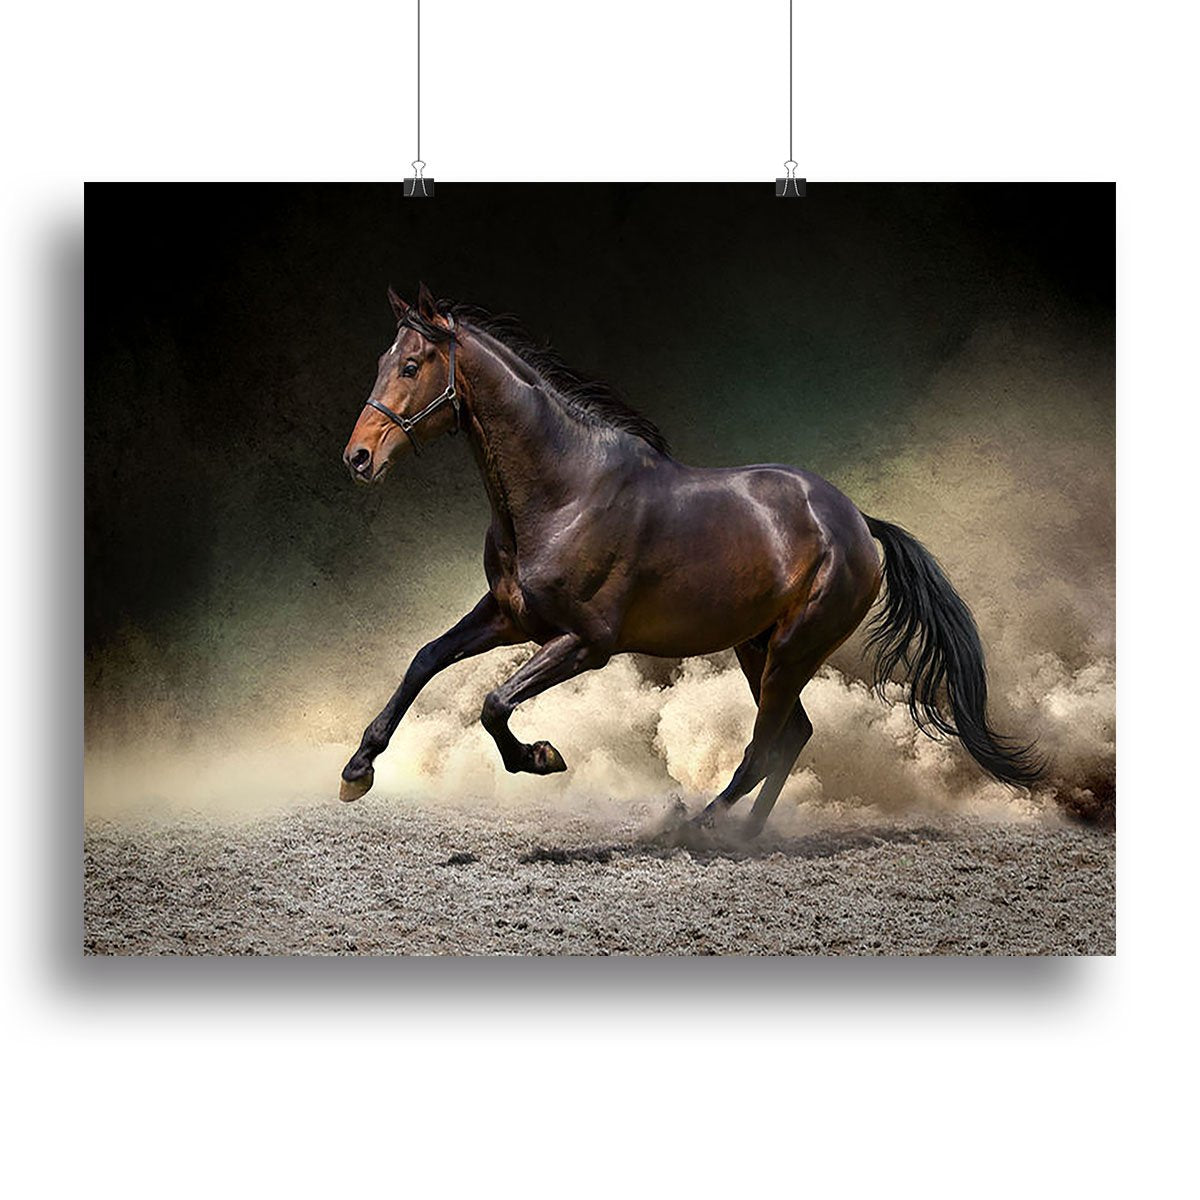 Black horse run gallop in dust desert Canvas Print or Poster